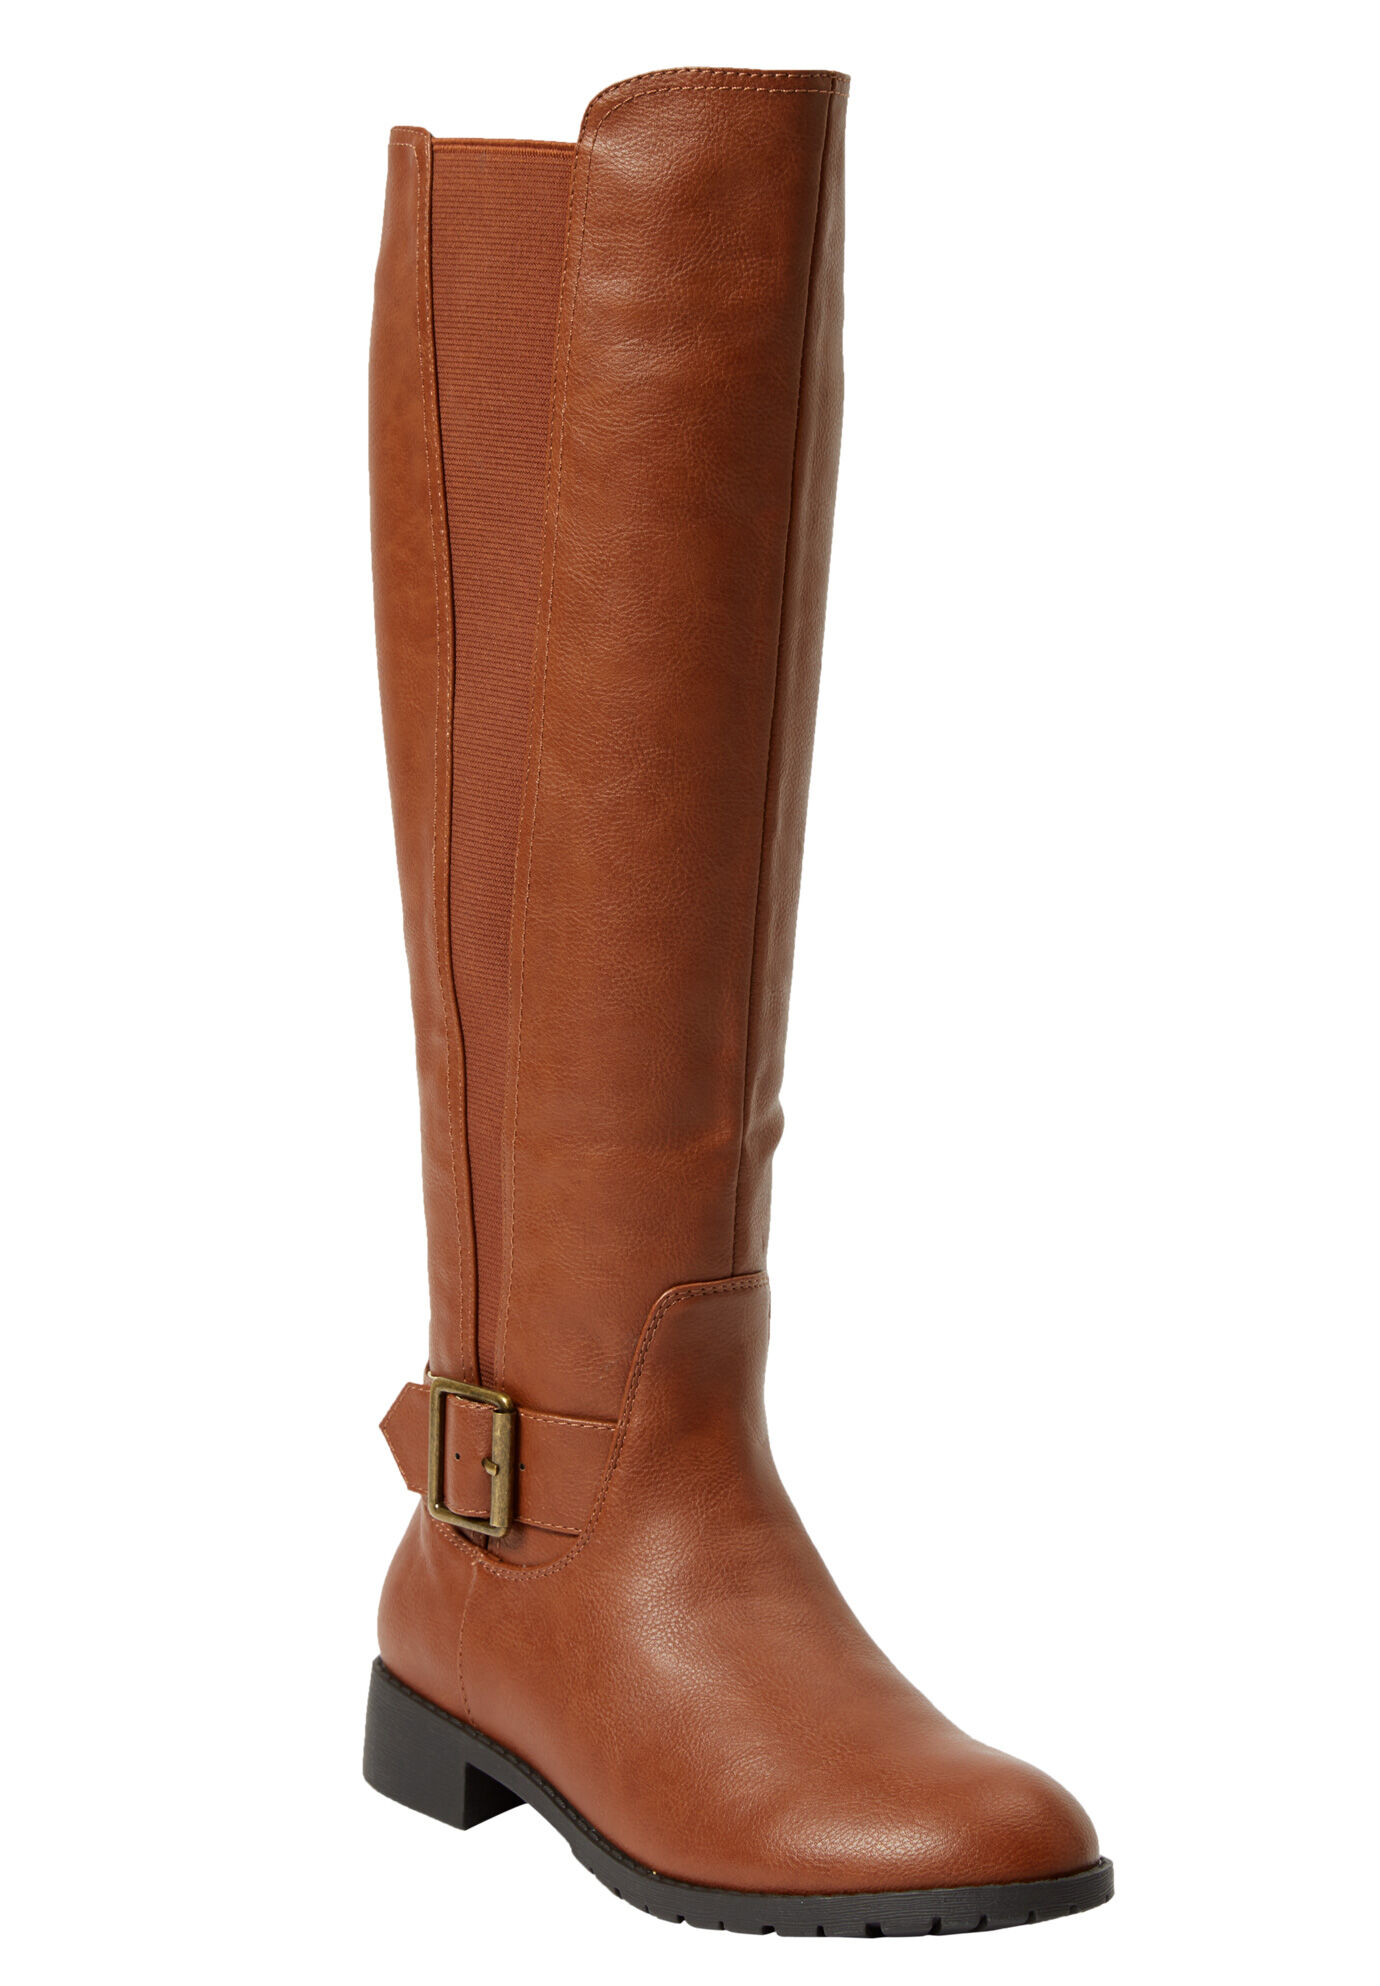 Wide \u0026 Extra Wide Calf Boots for Women 